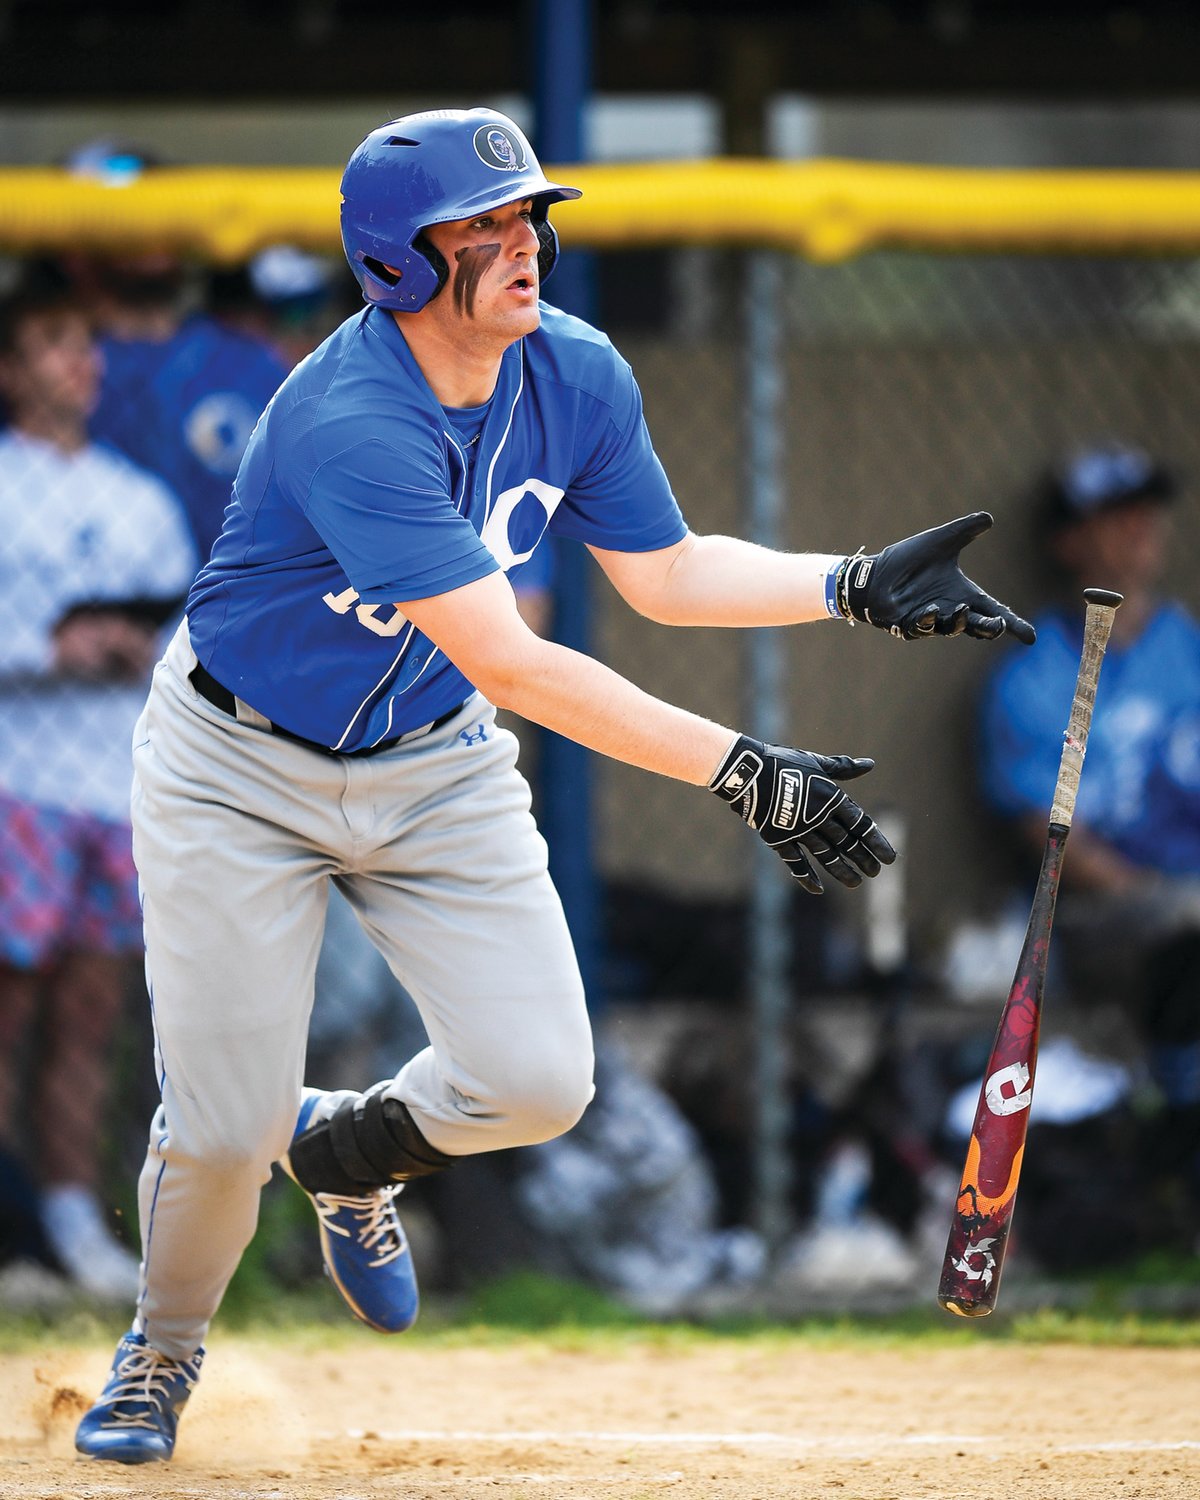 Quakertown’s Mike Richino watches his line drive fall for a double in the second inning.